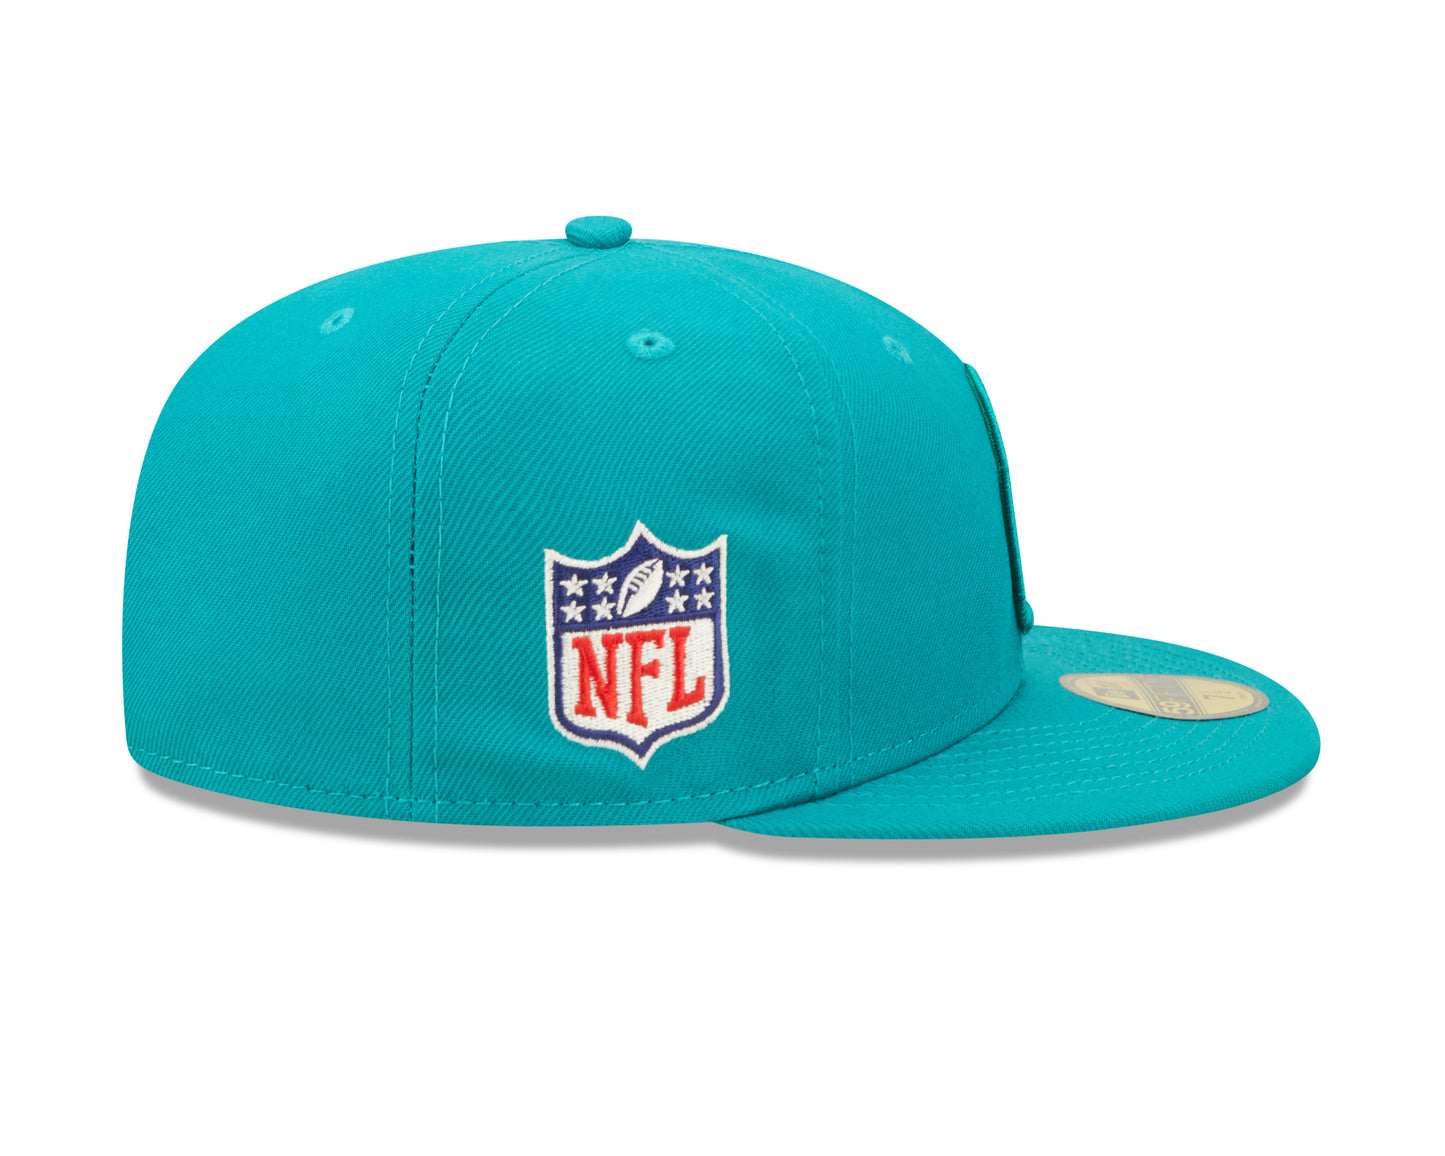 Miami Dolphins New Era Sideline 59FIFTY Historic Fitted Hat- Aqua